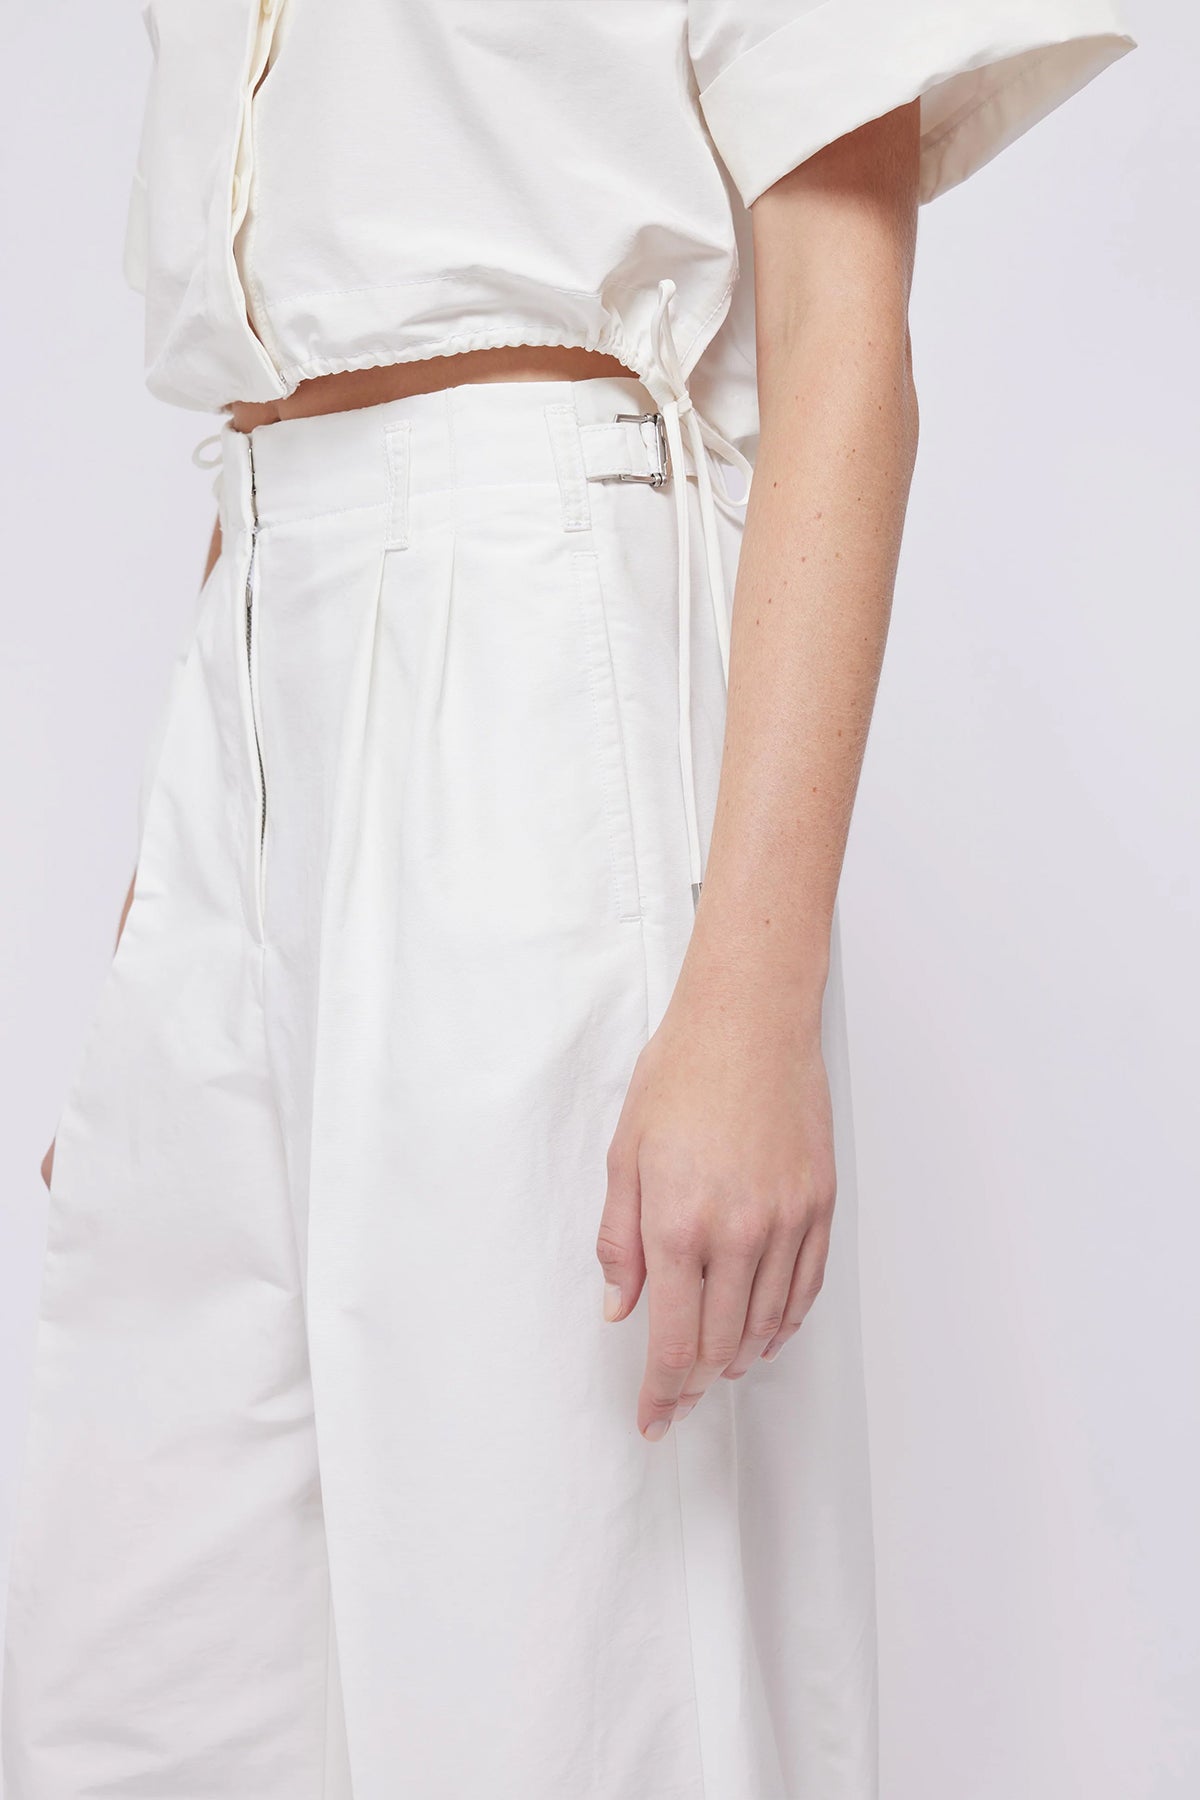 Leroy Pleated Wide Leg Pant in White - shop-olivia.com